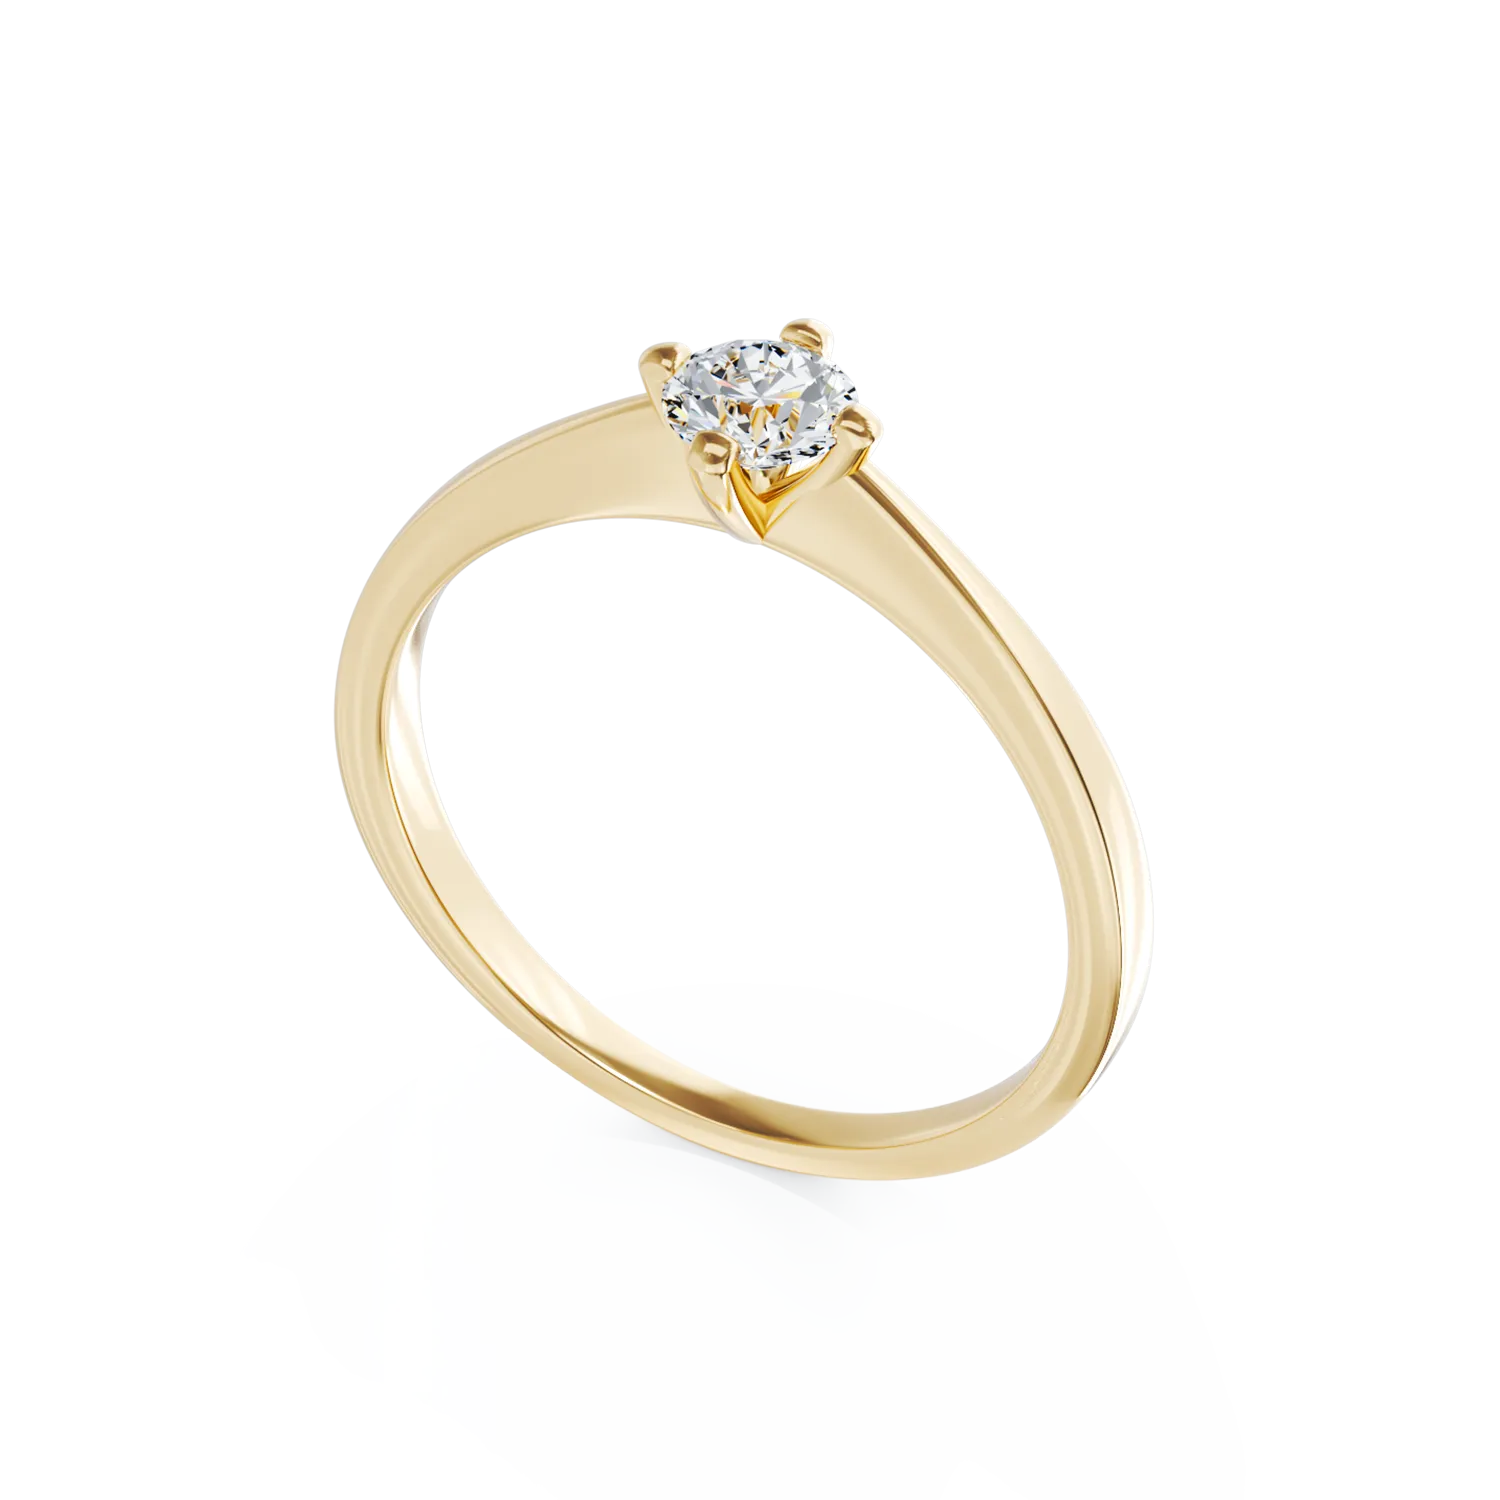 18K yellow gold engagement ring with 0.305ct diamond